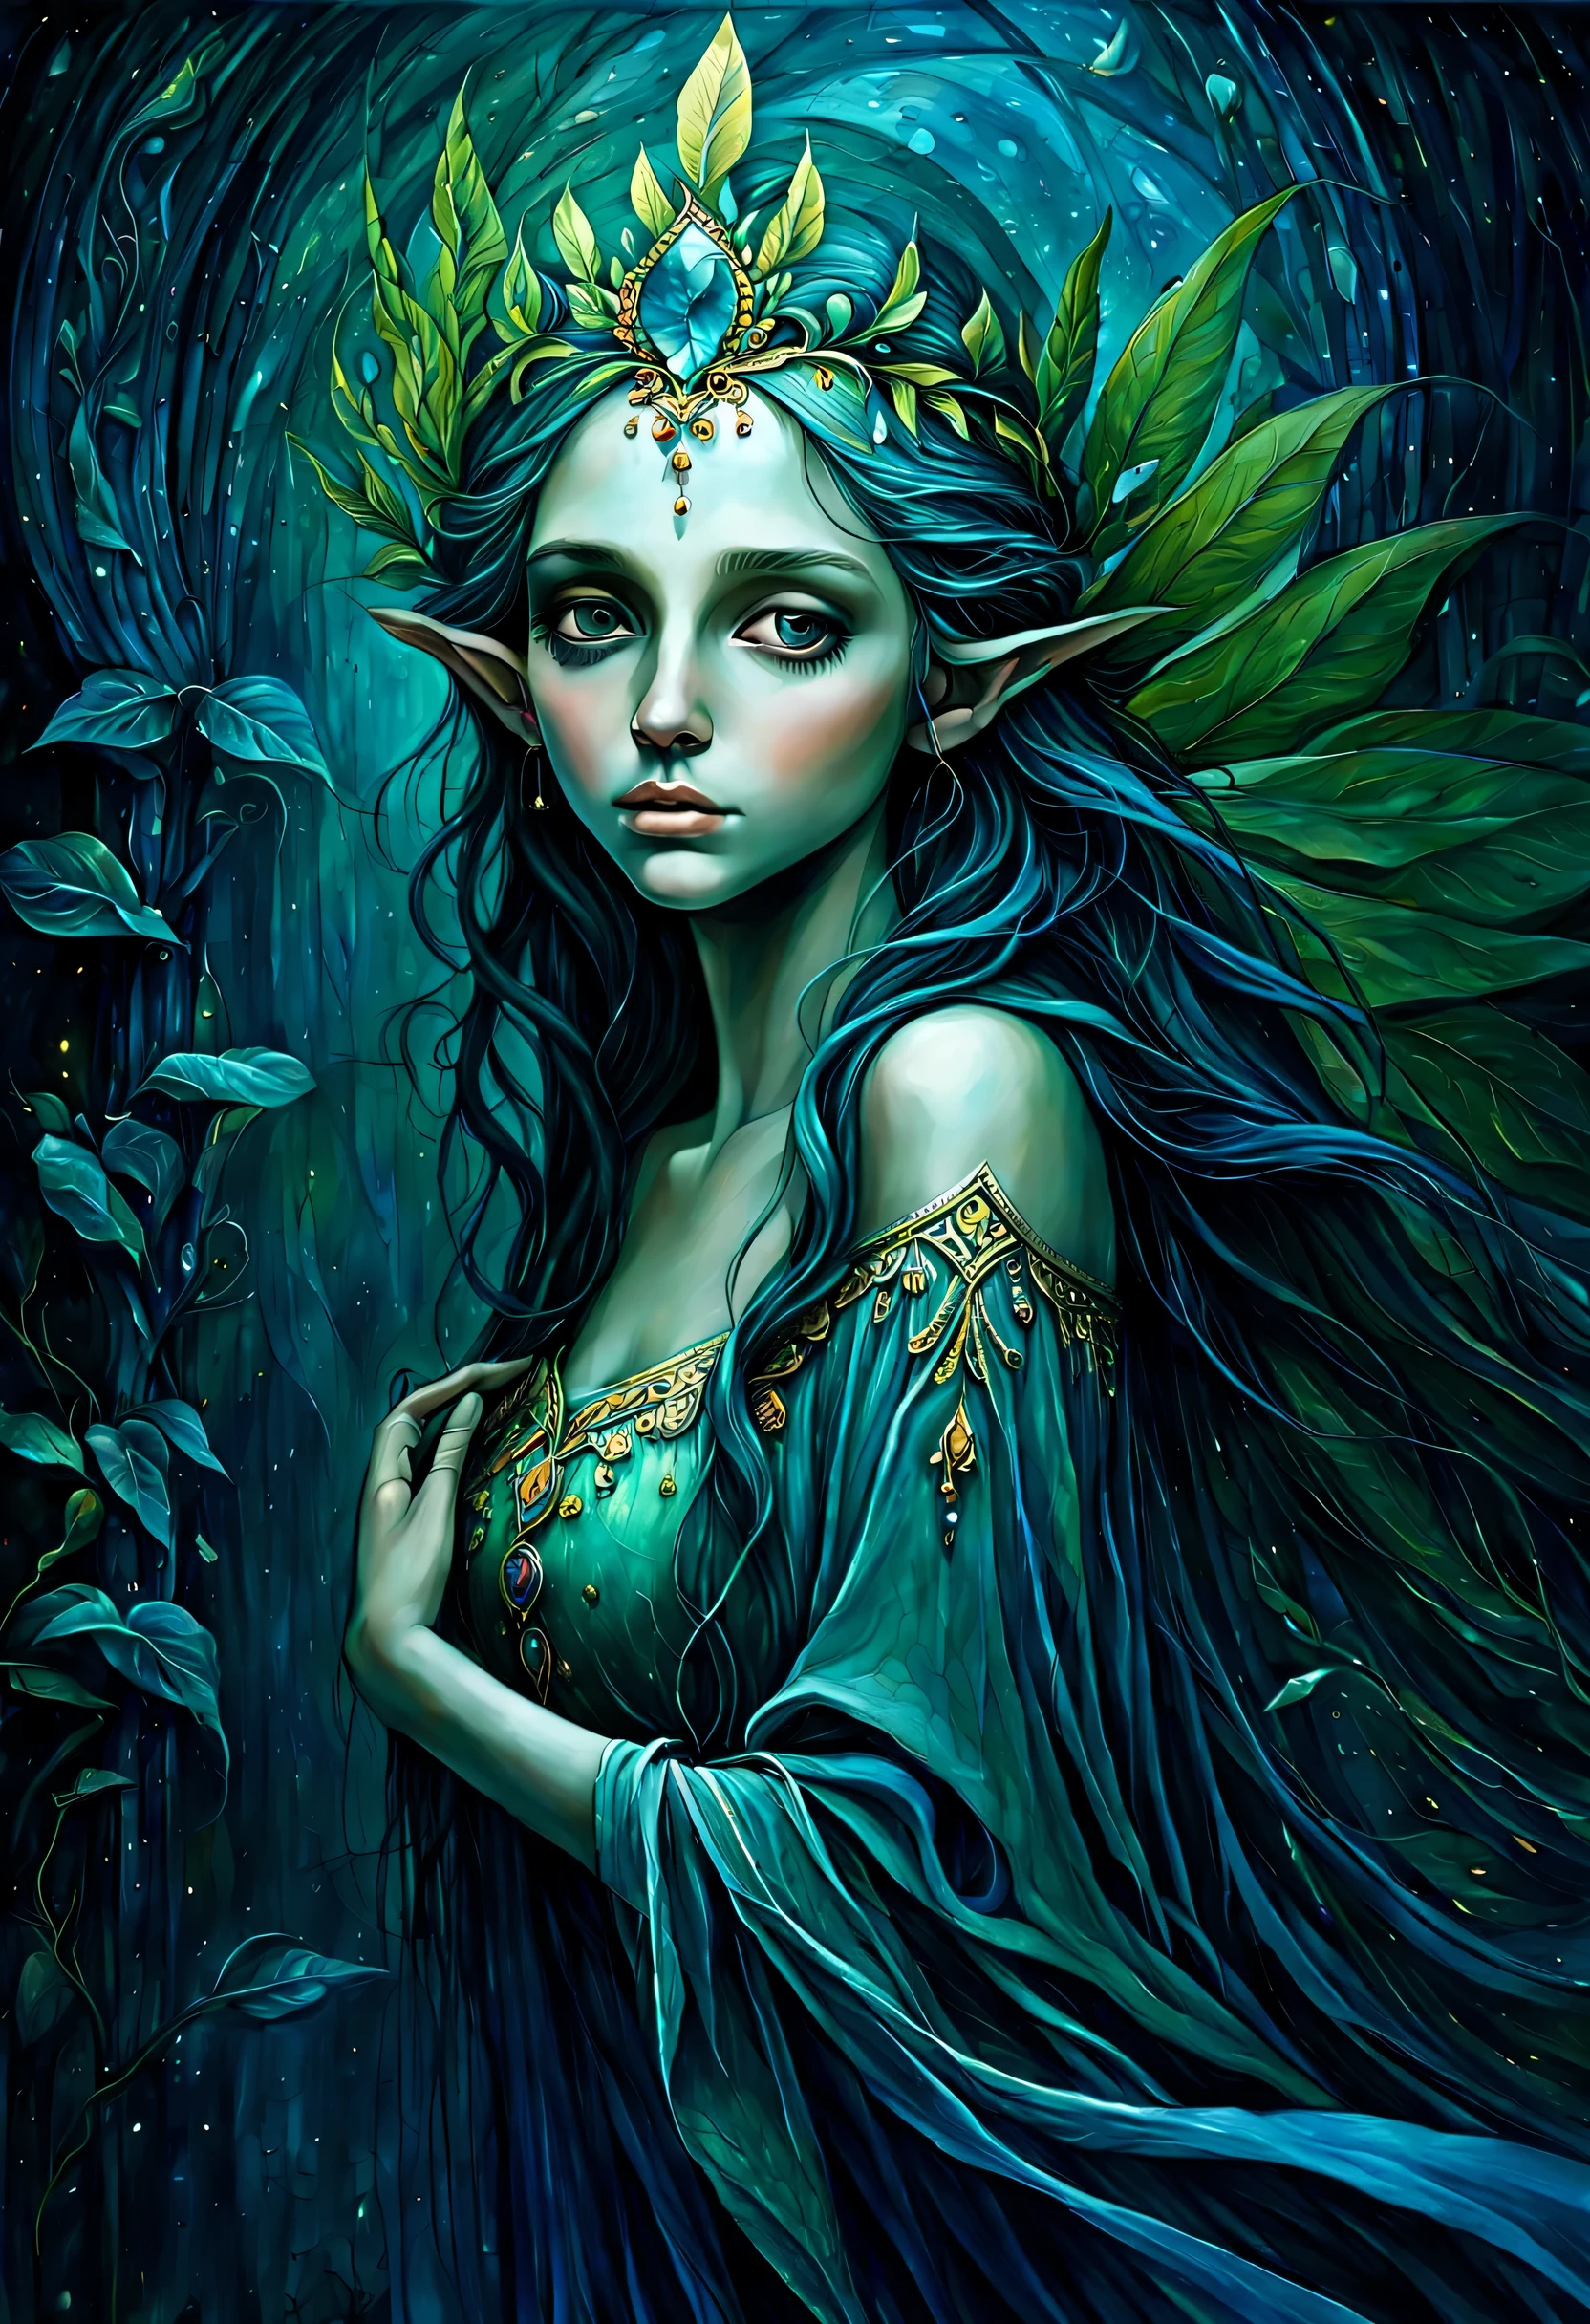 beautiful elf of portraits illustration, In alluringly melancholic depiction, beautifully dark fantasy world, comes to life through an expressive illustration, main subject of the image  vivid portrayal of despair and sadness, which radiates faint glimmer of elusive joy, stunningly intricate detailed fresco captivates viewers, its fusion and harmony of contrasting emotions, through skilled use of brushstrokes and rich color, vivid and dark light image breathes life into the depths of melancholy, while still leaving a trace of hope lingering in the shadows, exquisitely crafted painting showcases, remarkable attention to delicate detail, truly drawing into the immersive realm,